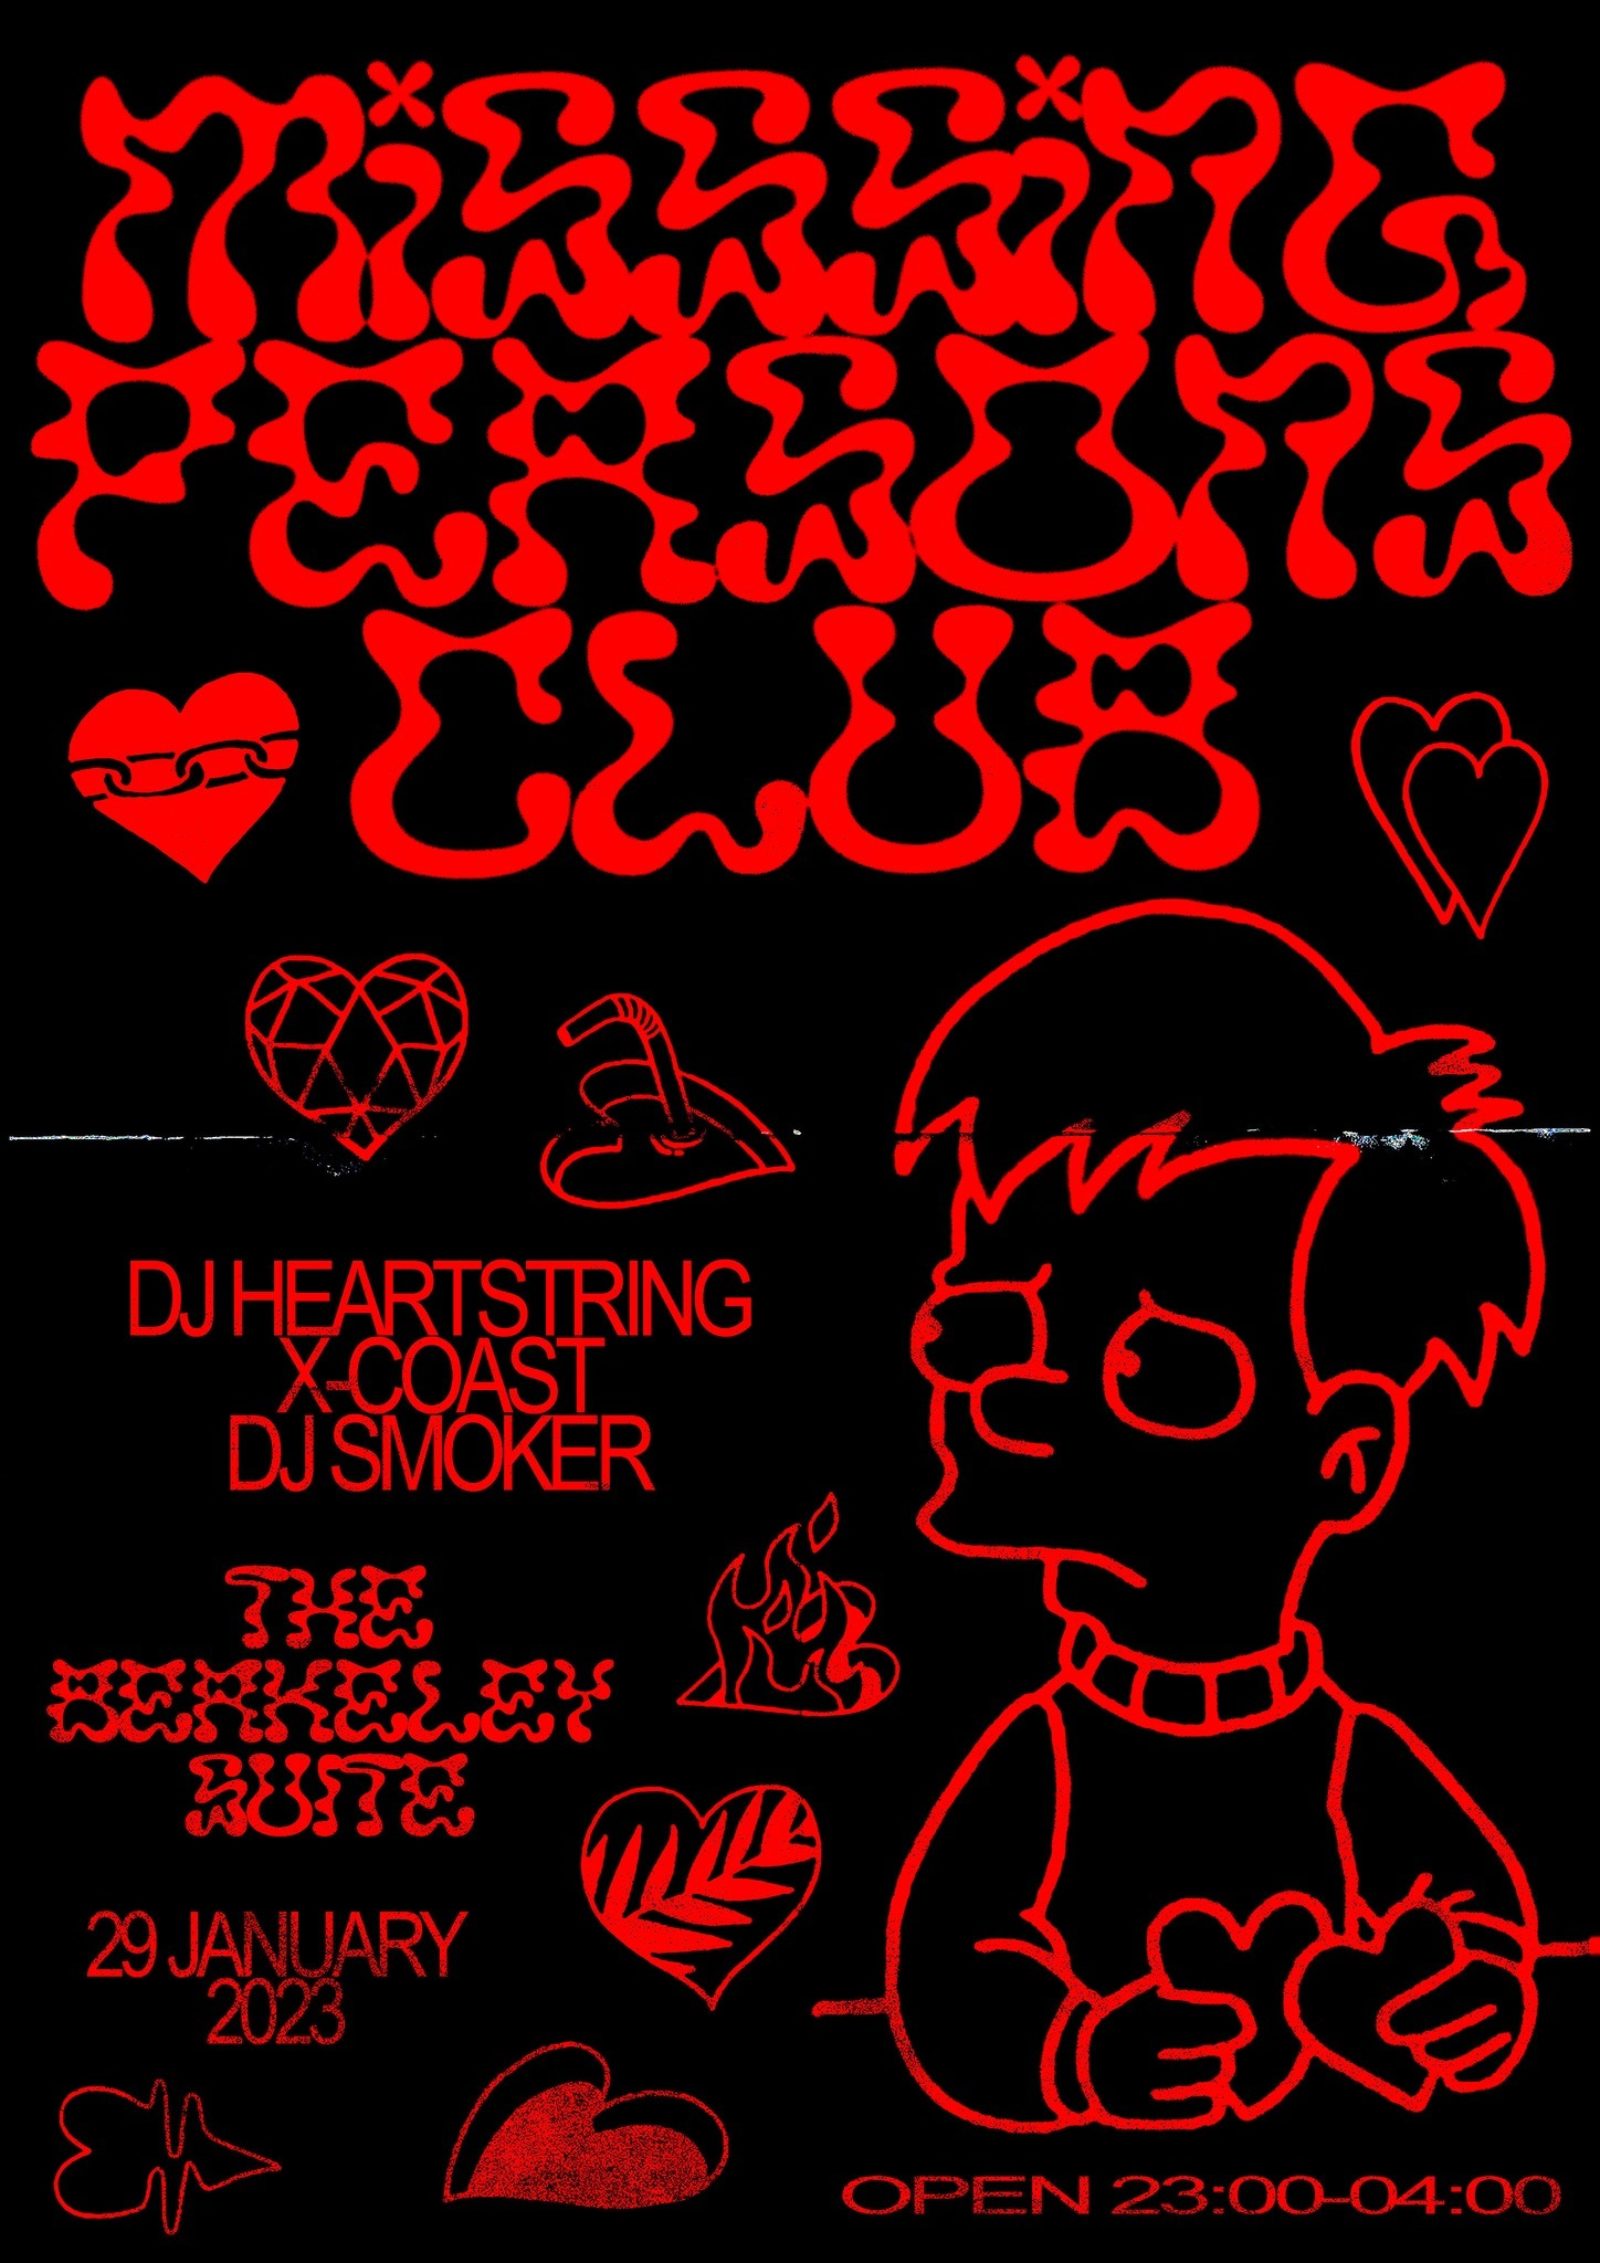 MISSING PERSONS CLUB with X-COAST & DJ HEARTSTRING